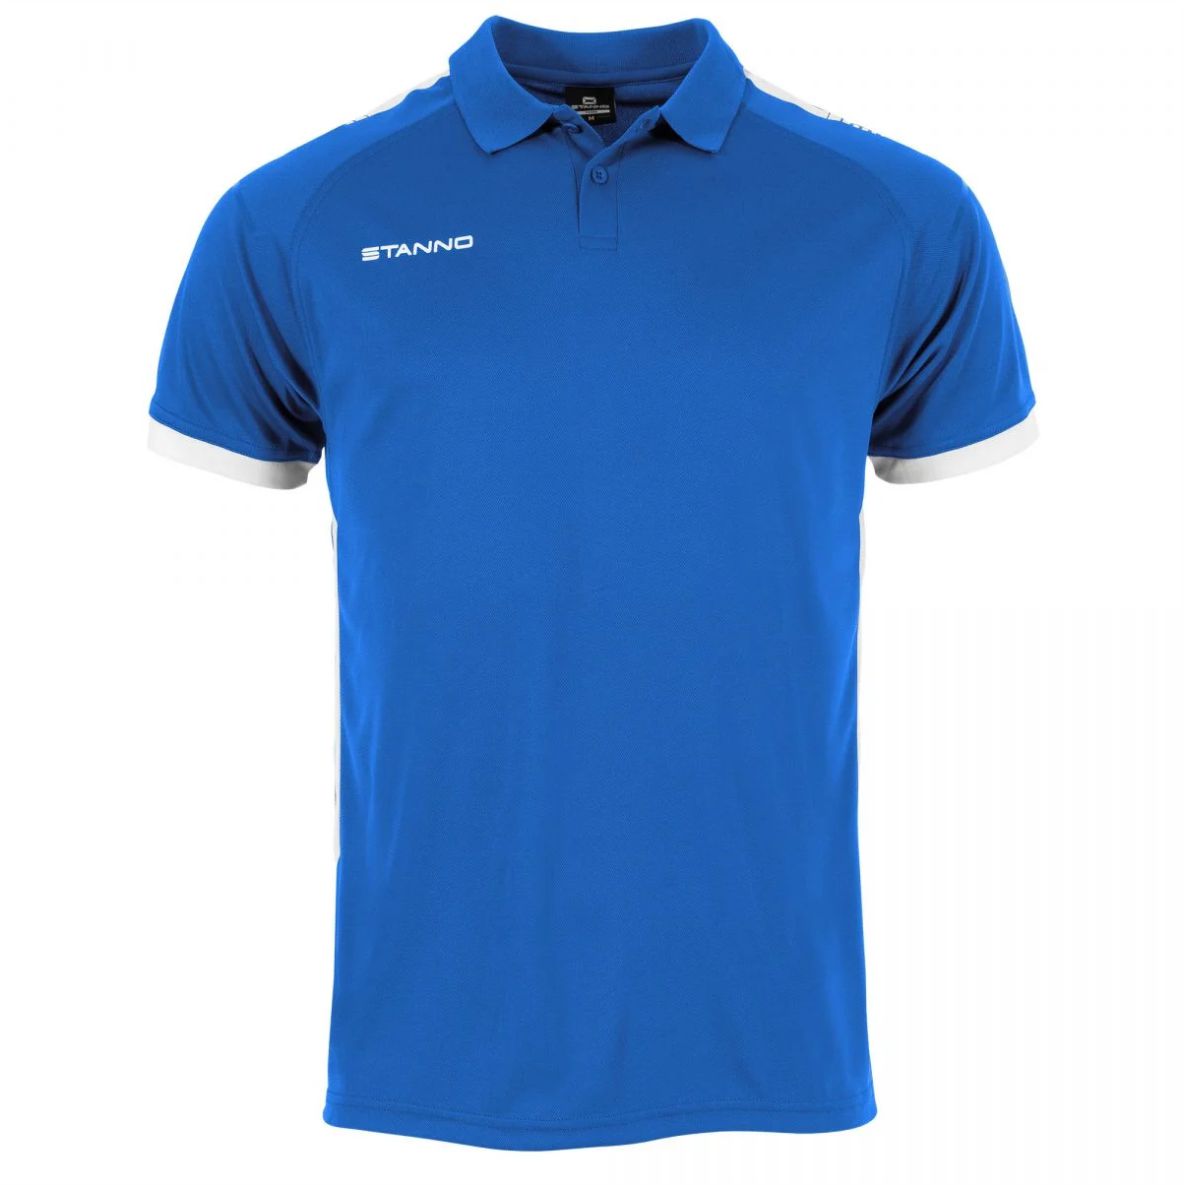 Stanno - First Polo - Royal